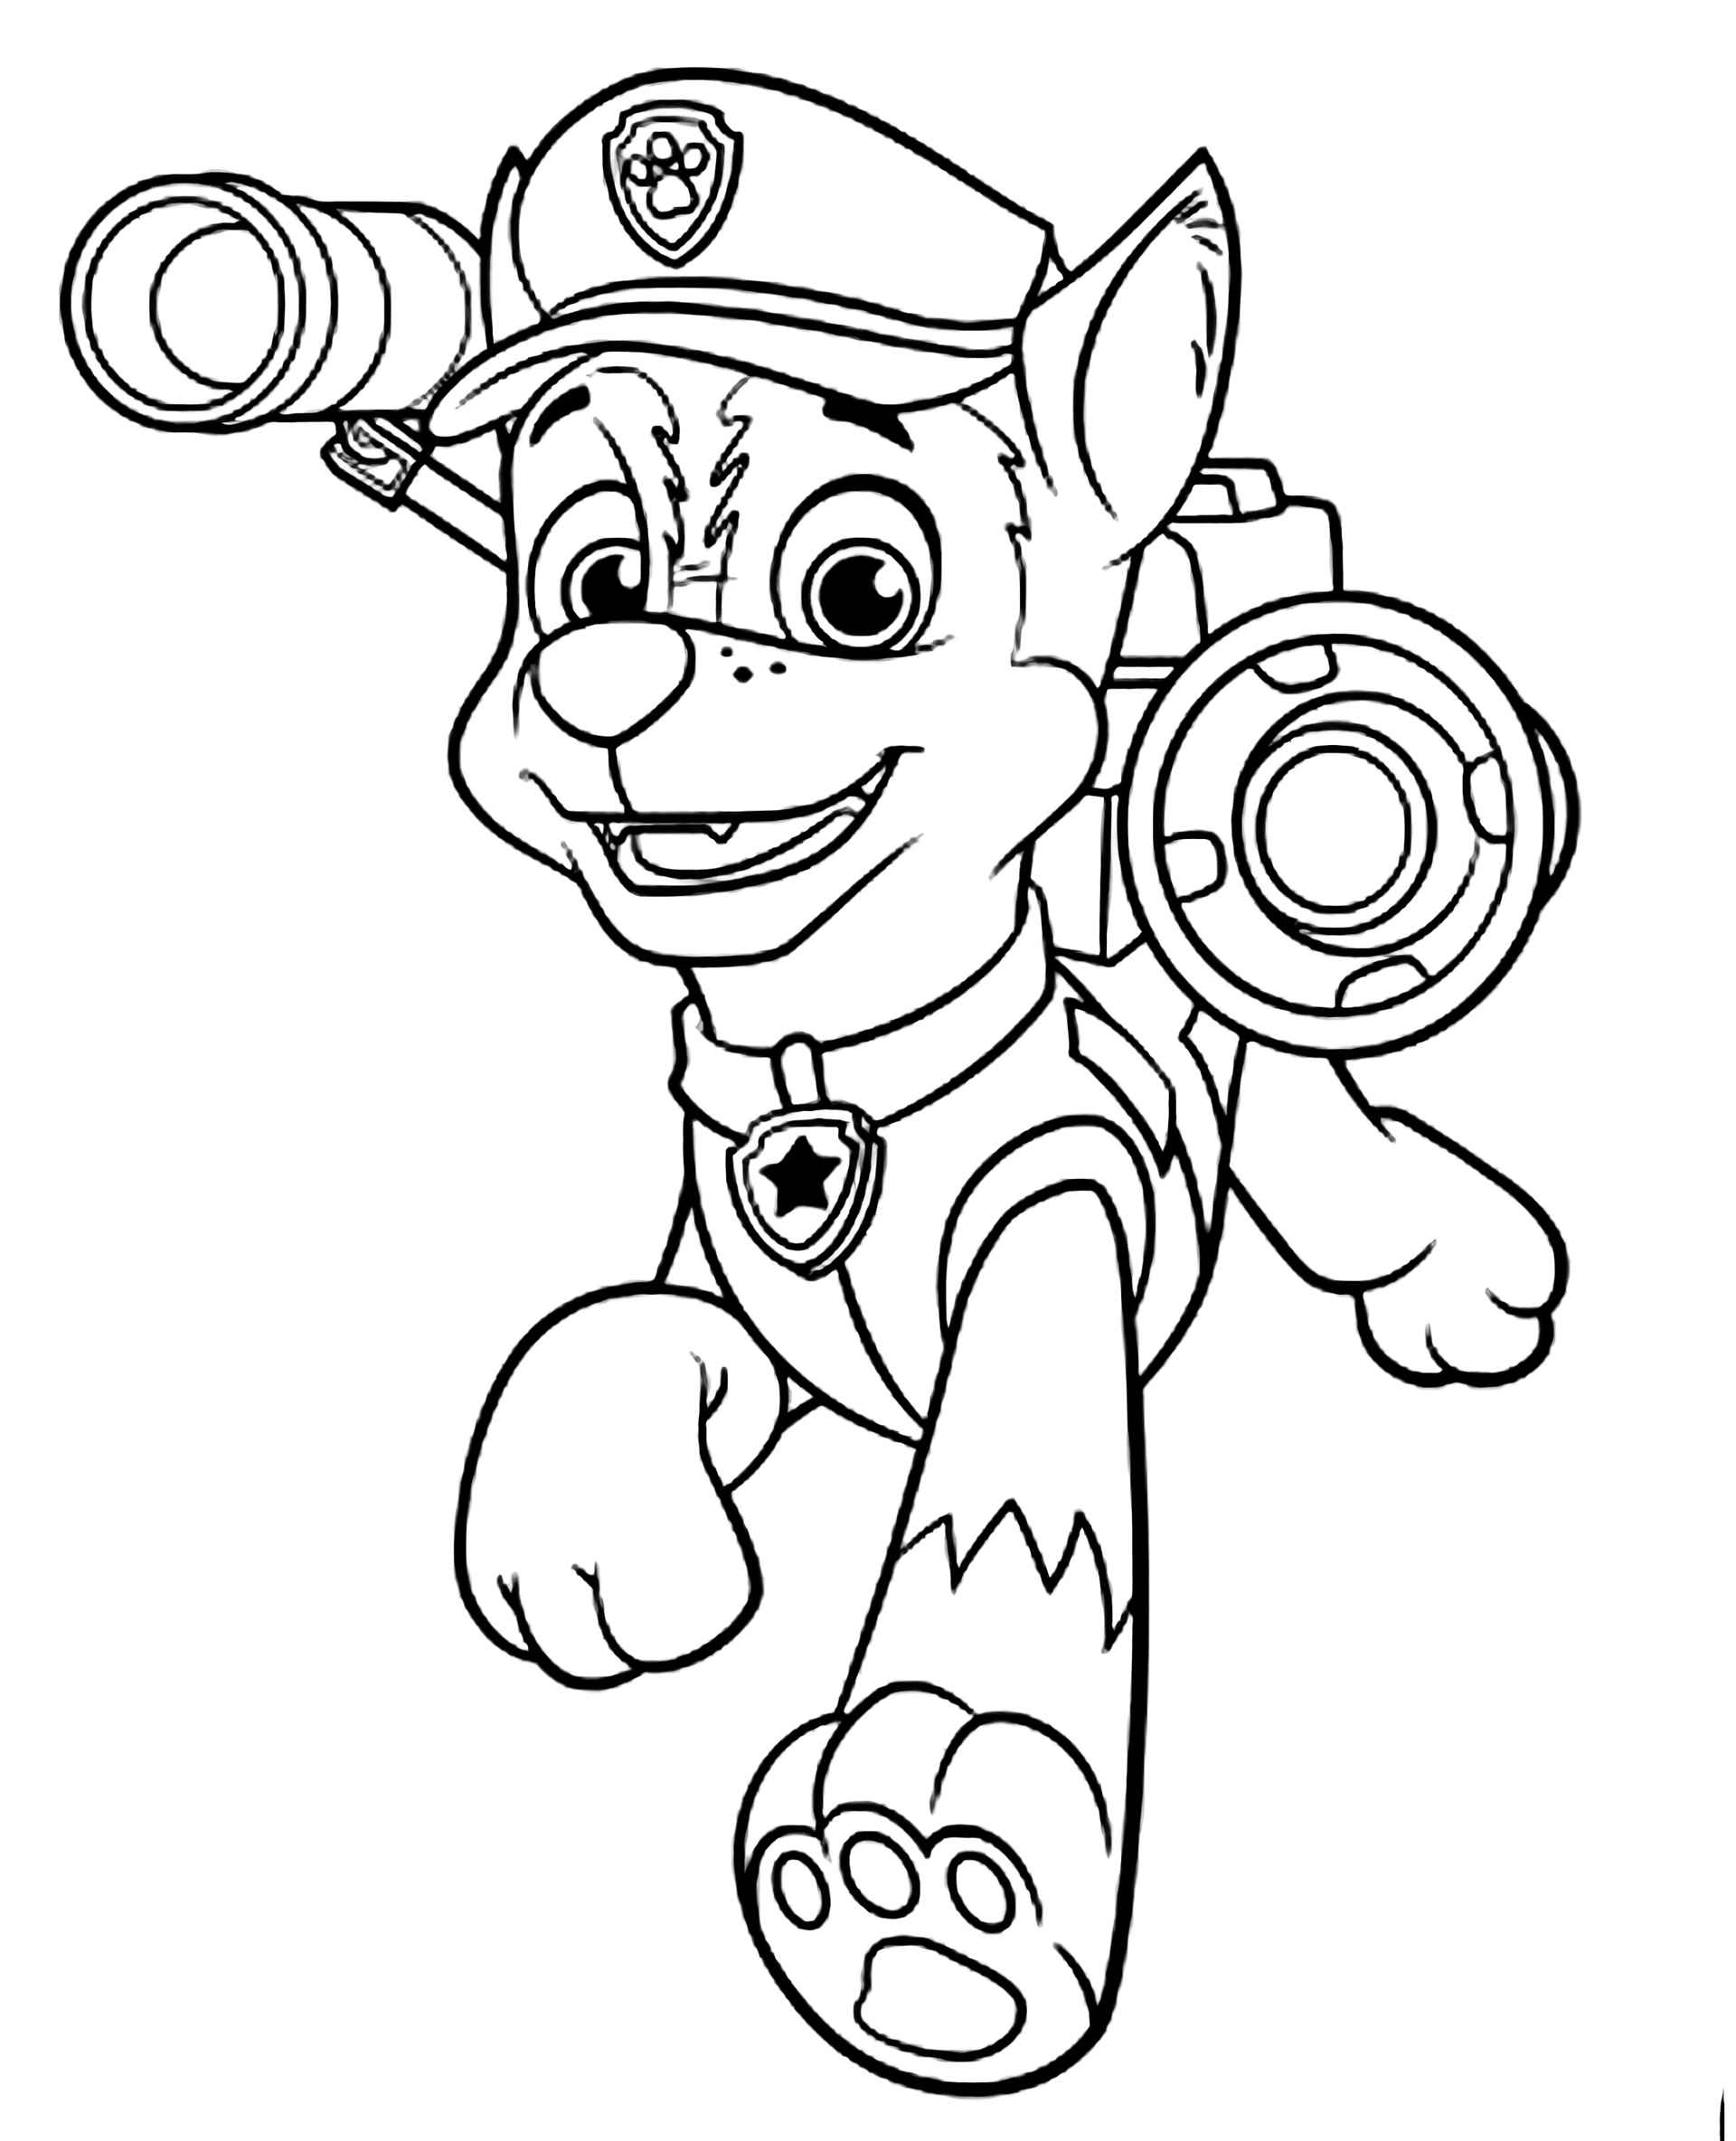 Printable Chase Paw Patrol Coloring Pages - printable Chase Paw Patrol Coloring Pages